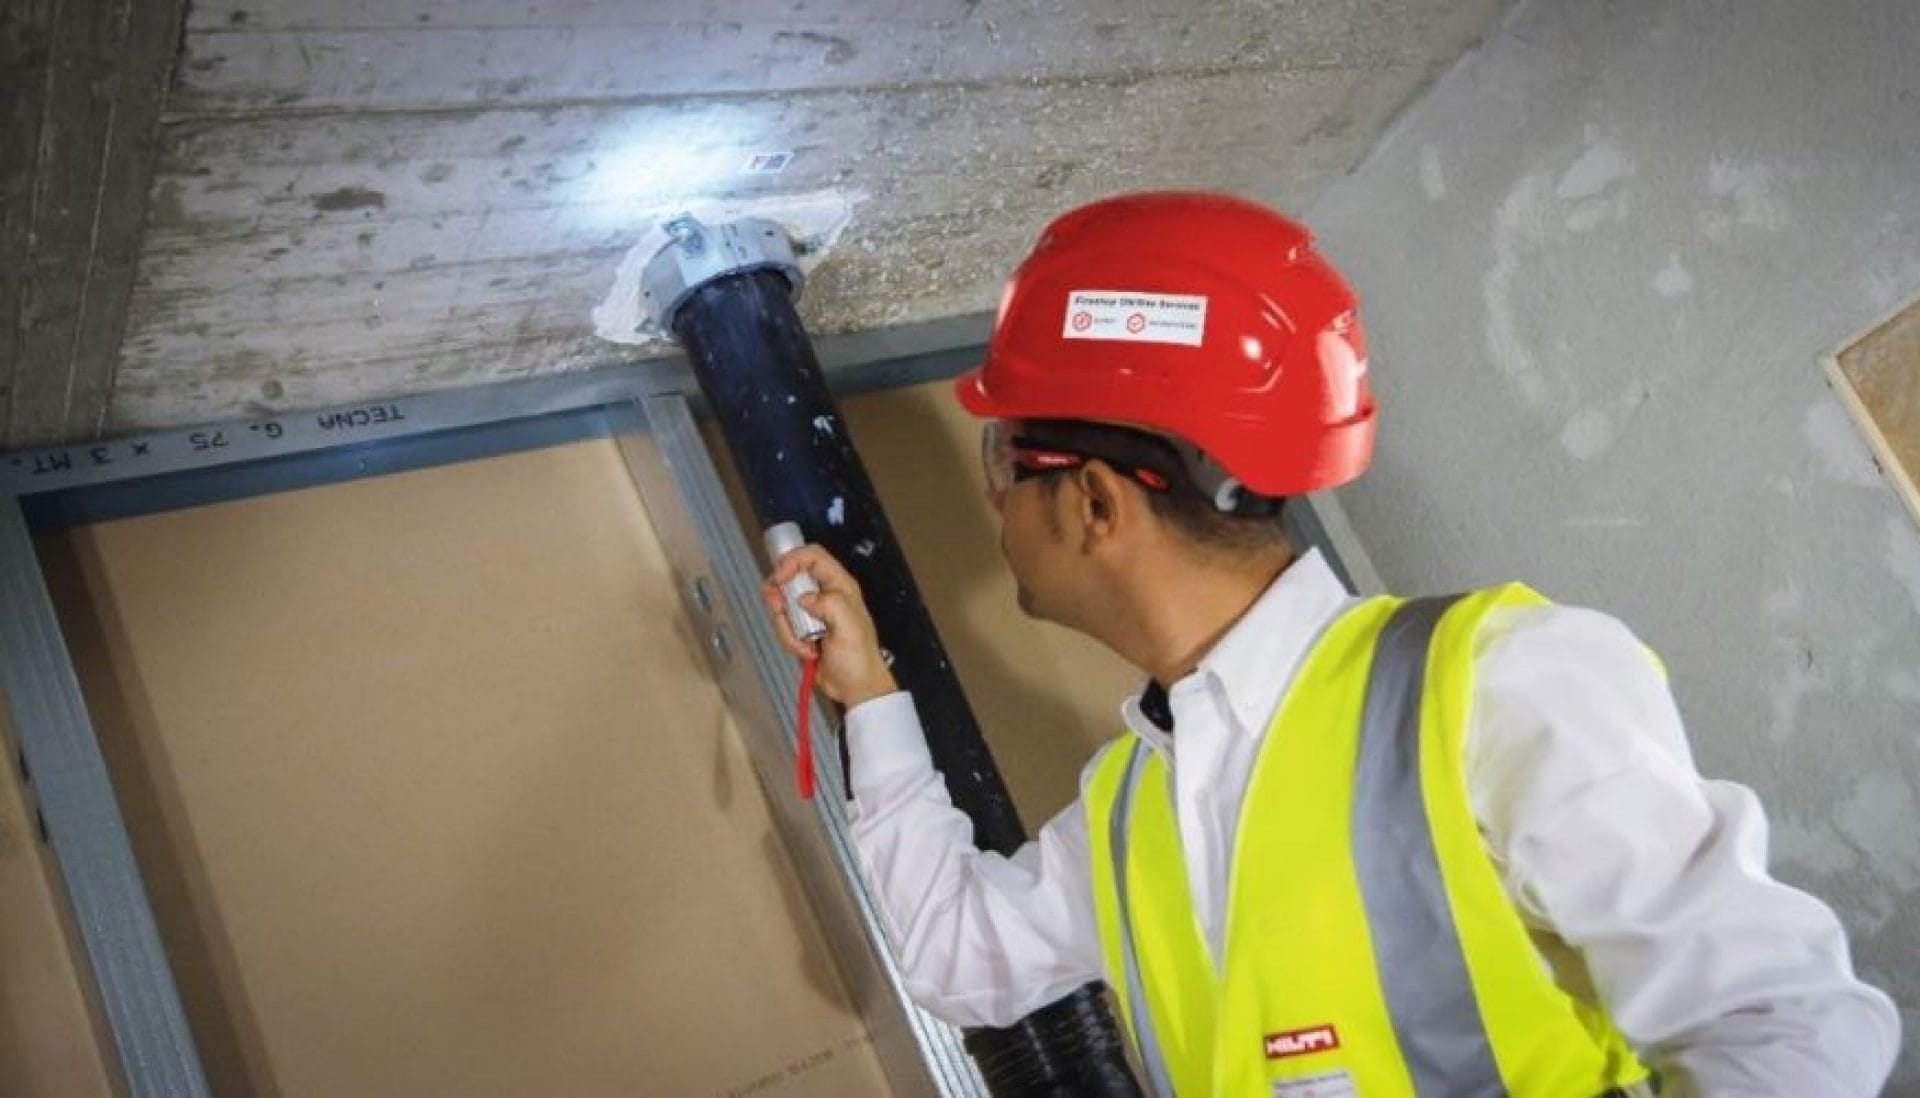 Onsite documentation vouches for quality installation prior to inspection